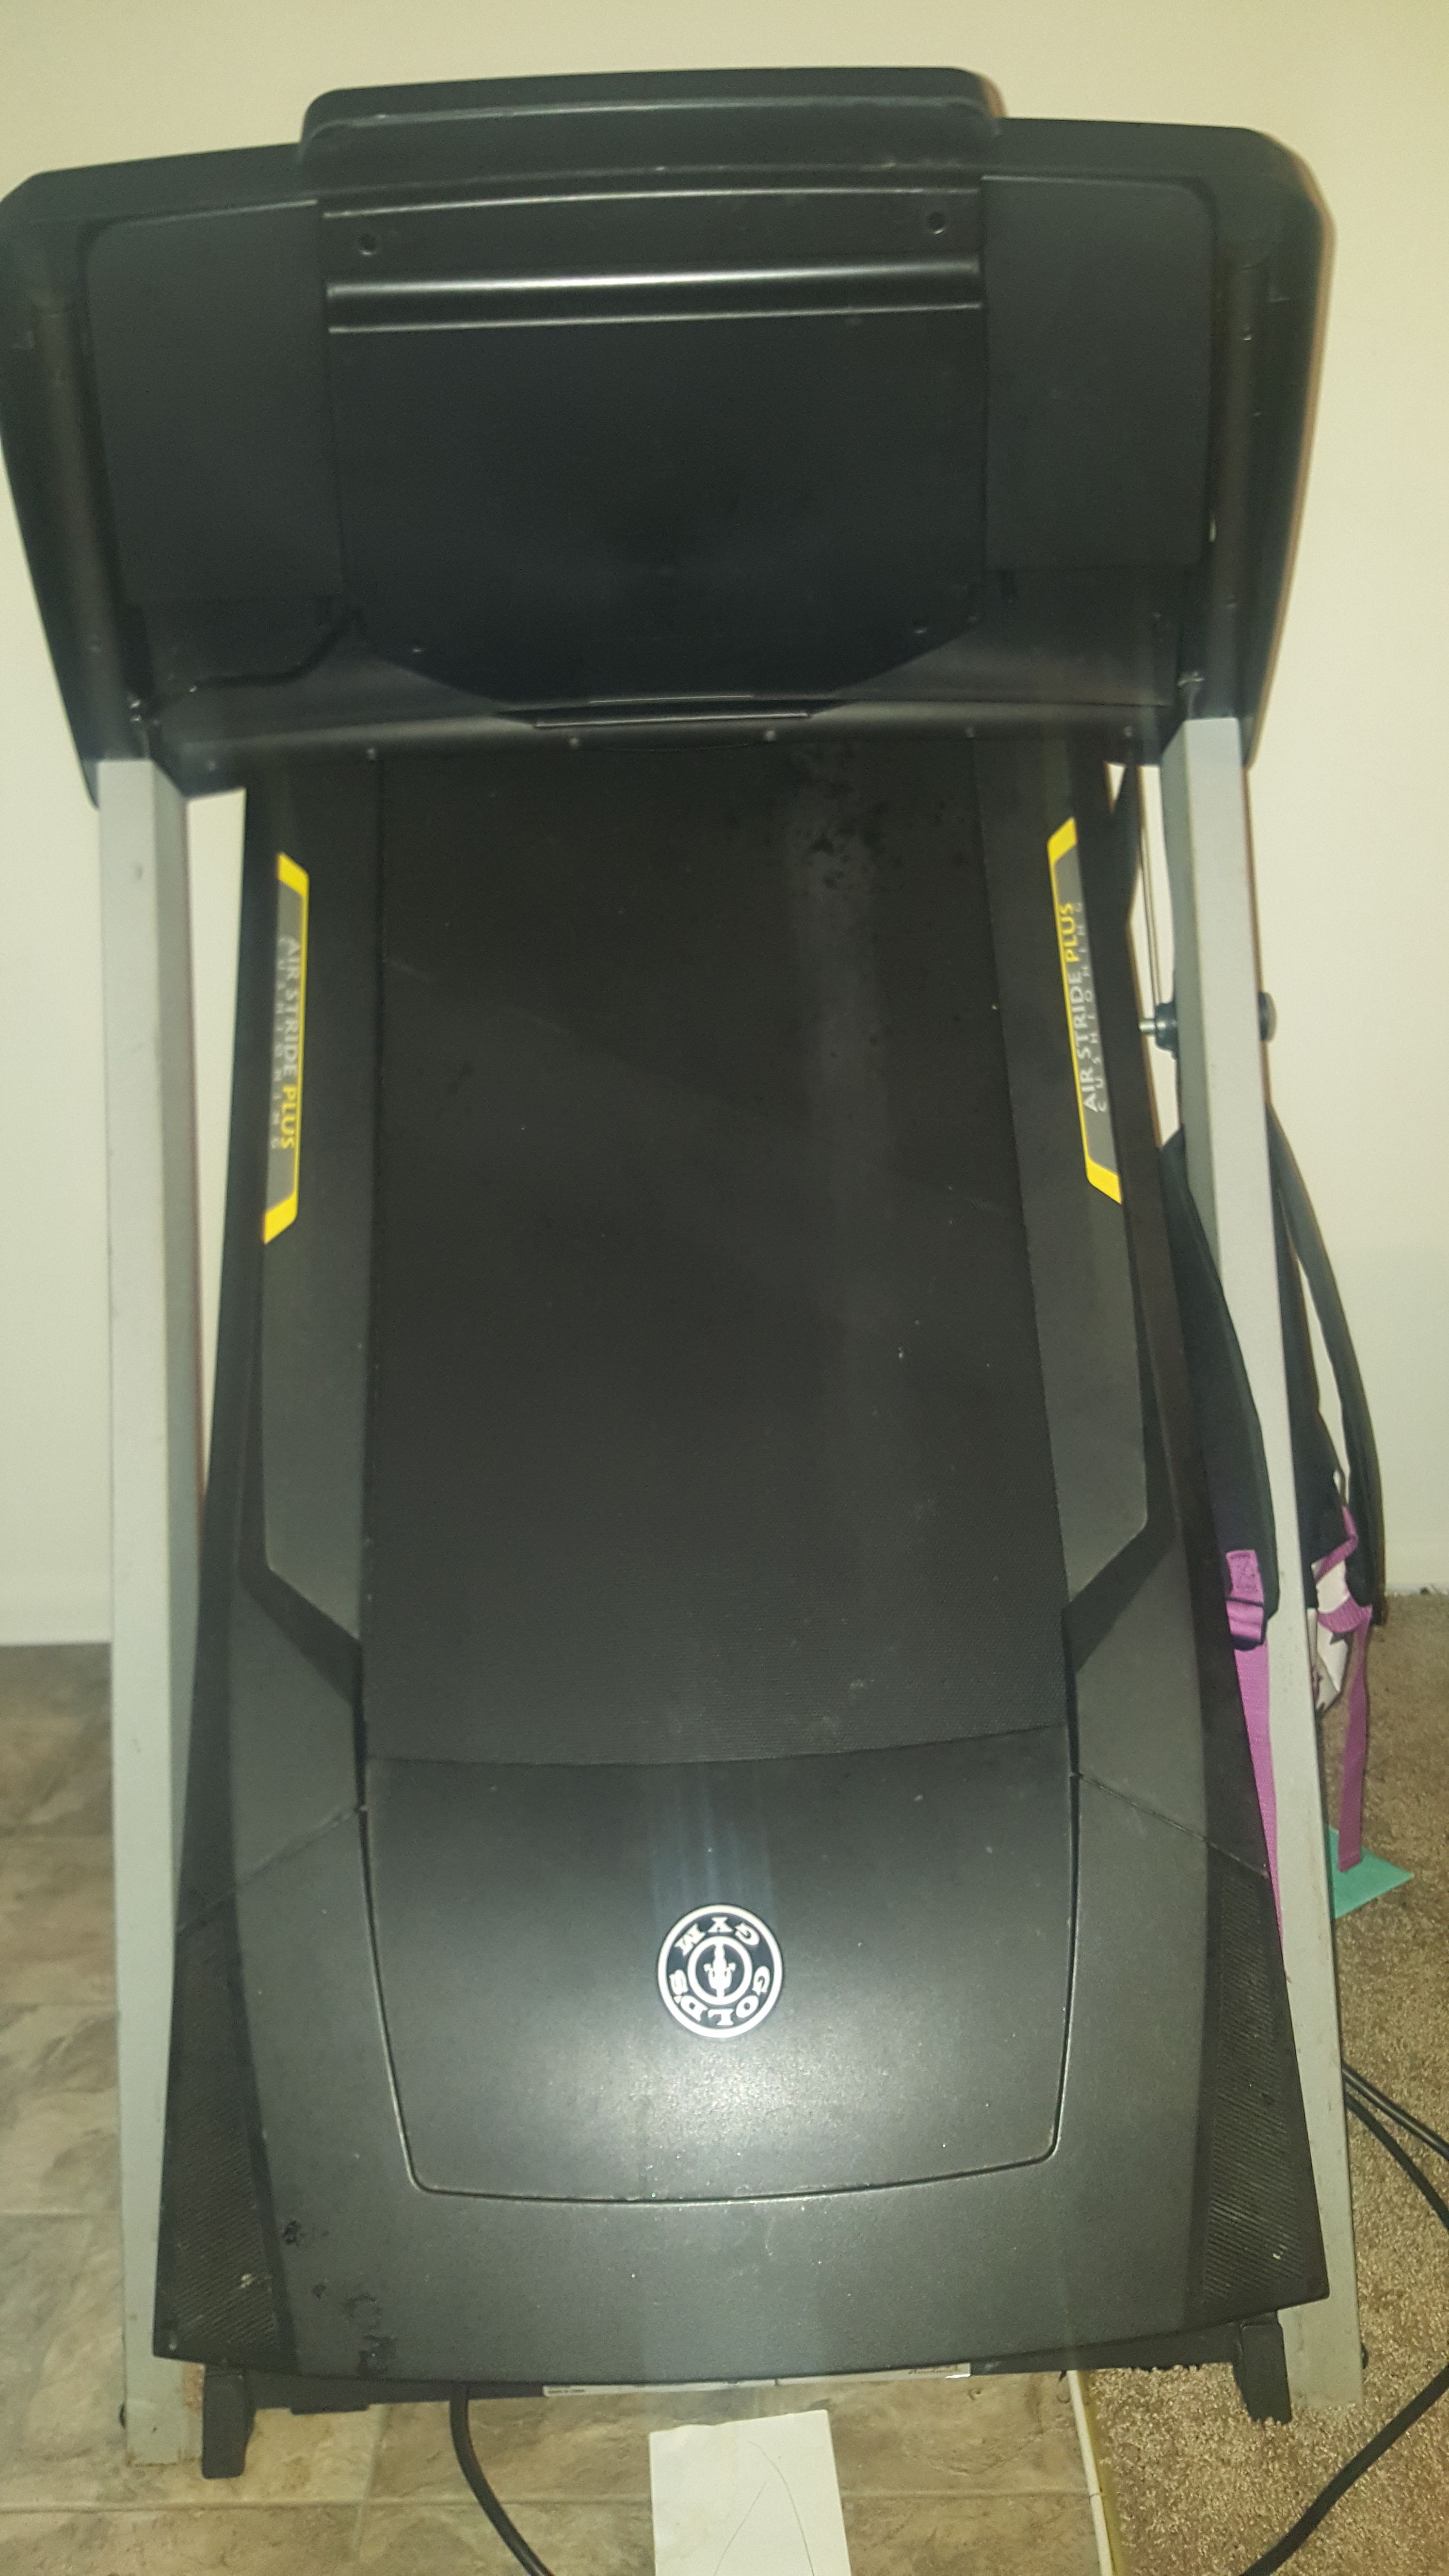 Golds Gym Air Stride Plus Treadmill (price listed OBO)